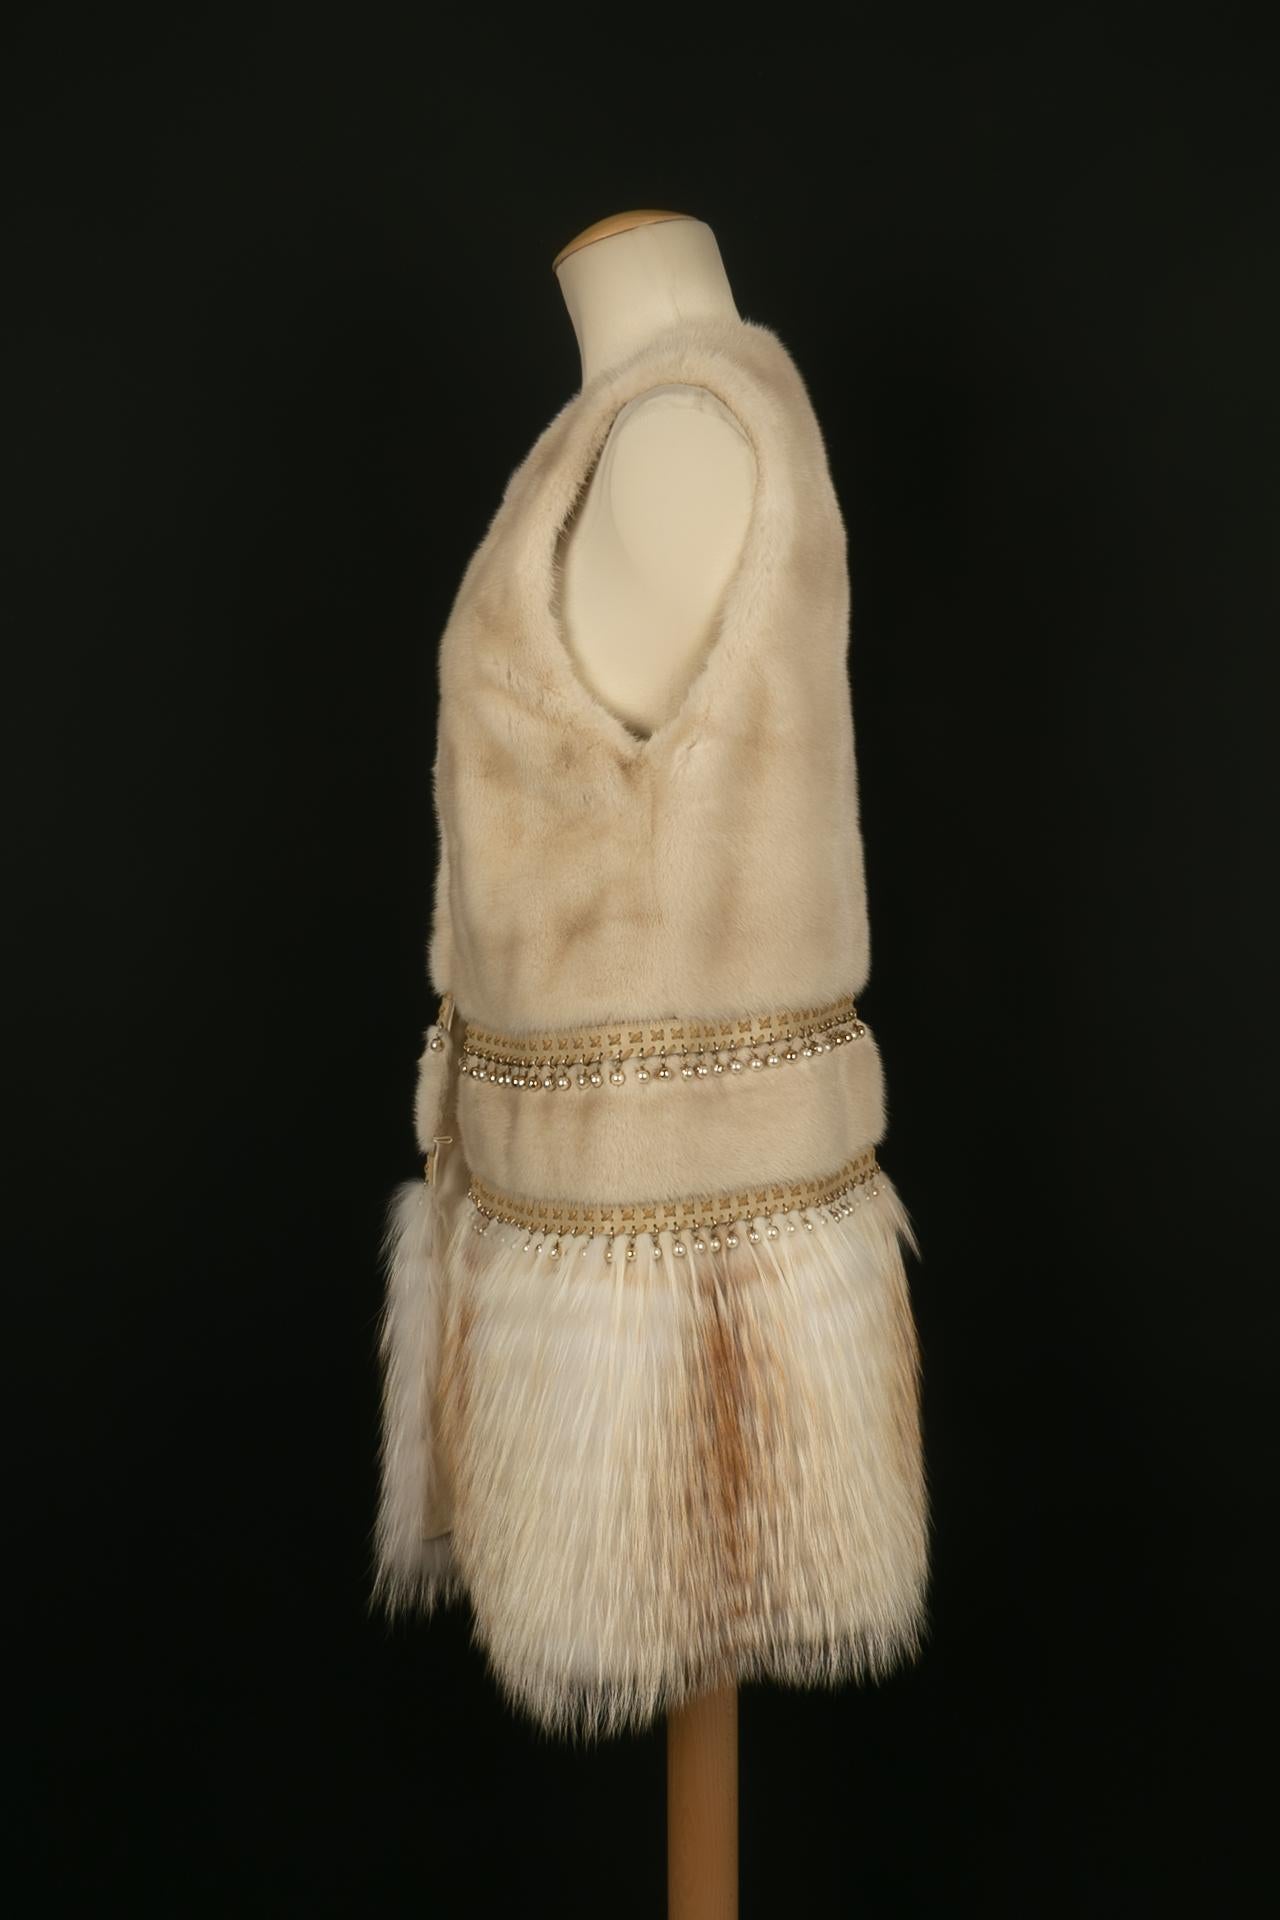 DIOR - (Made in France) Sleeveless coat in sand mink, horizontal work interspersed with leather and pearl strips. The bottom of the garment is made of fox on leather inserts. No size indicated, it fits a 38FR/40FR.
Clothing from the 2010s.